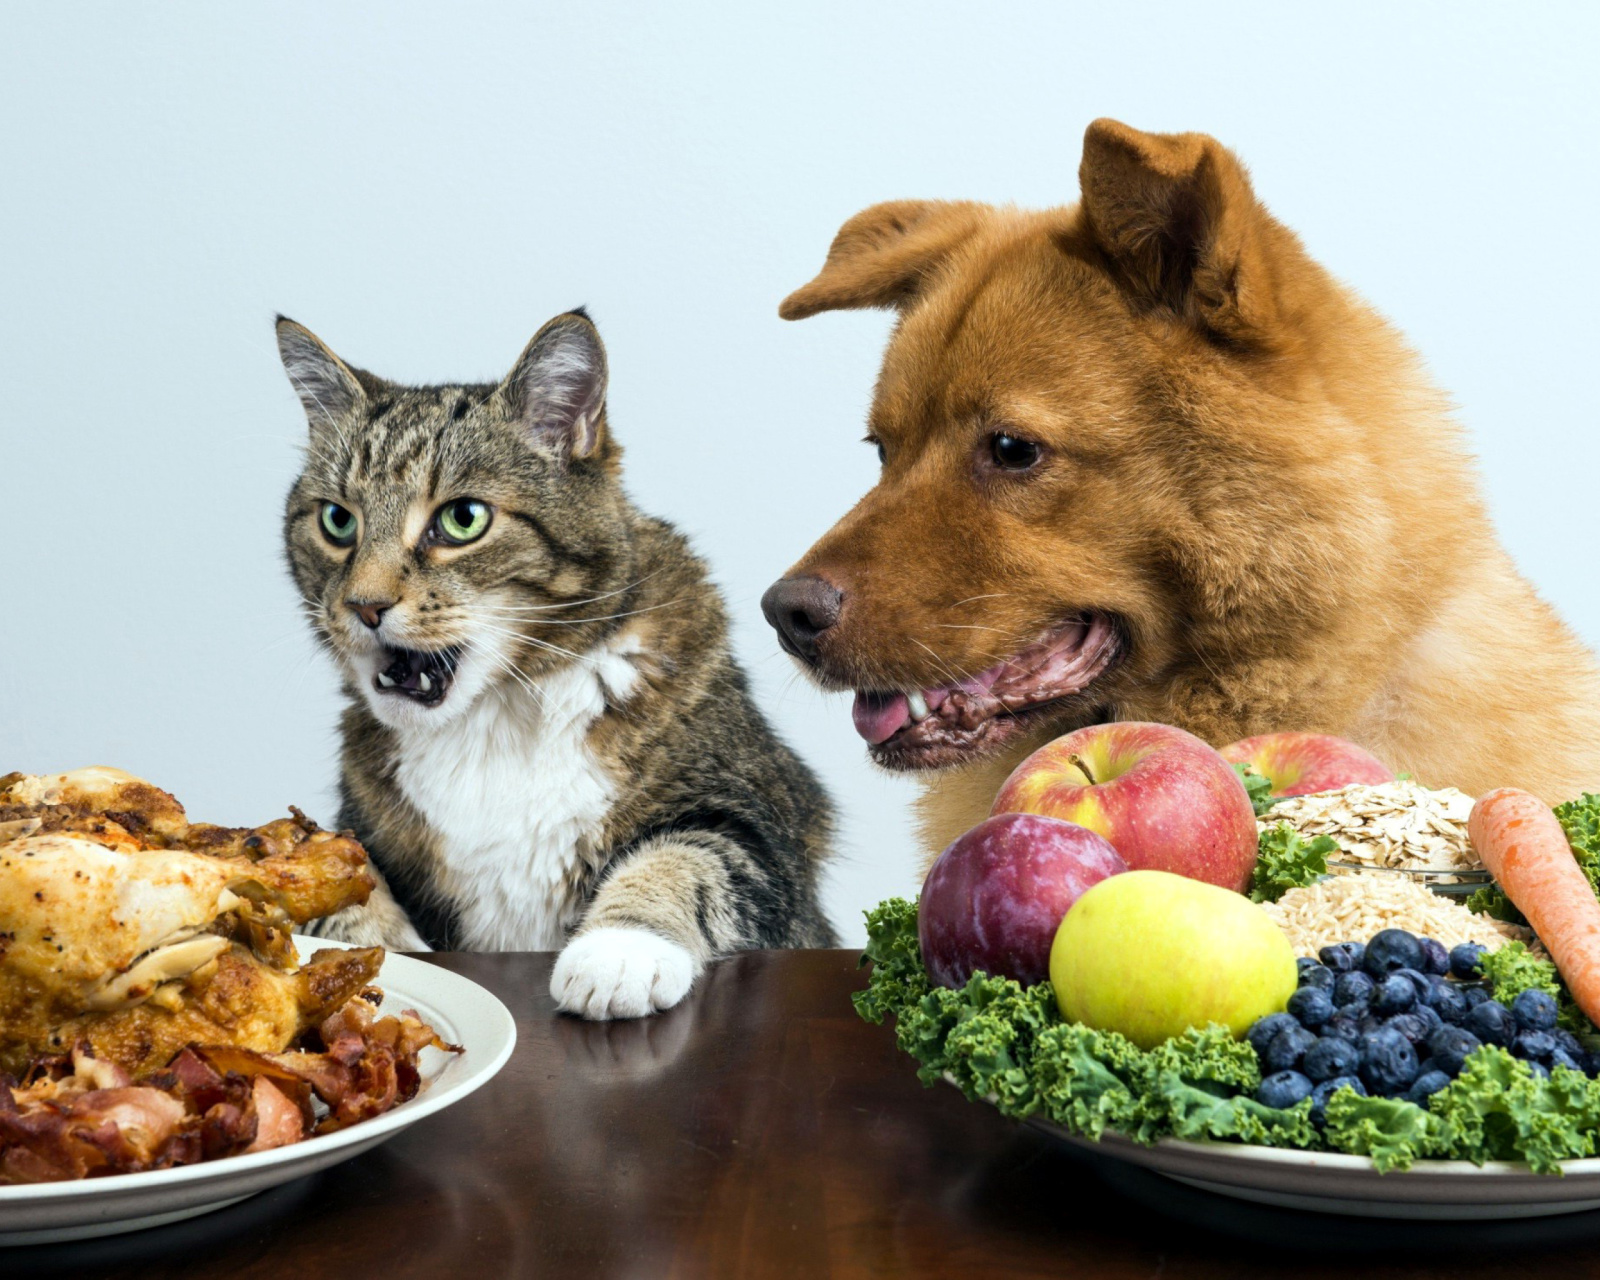 Dog and Cat Dinner wallpaper 1600x1280